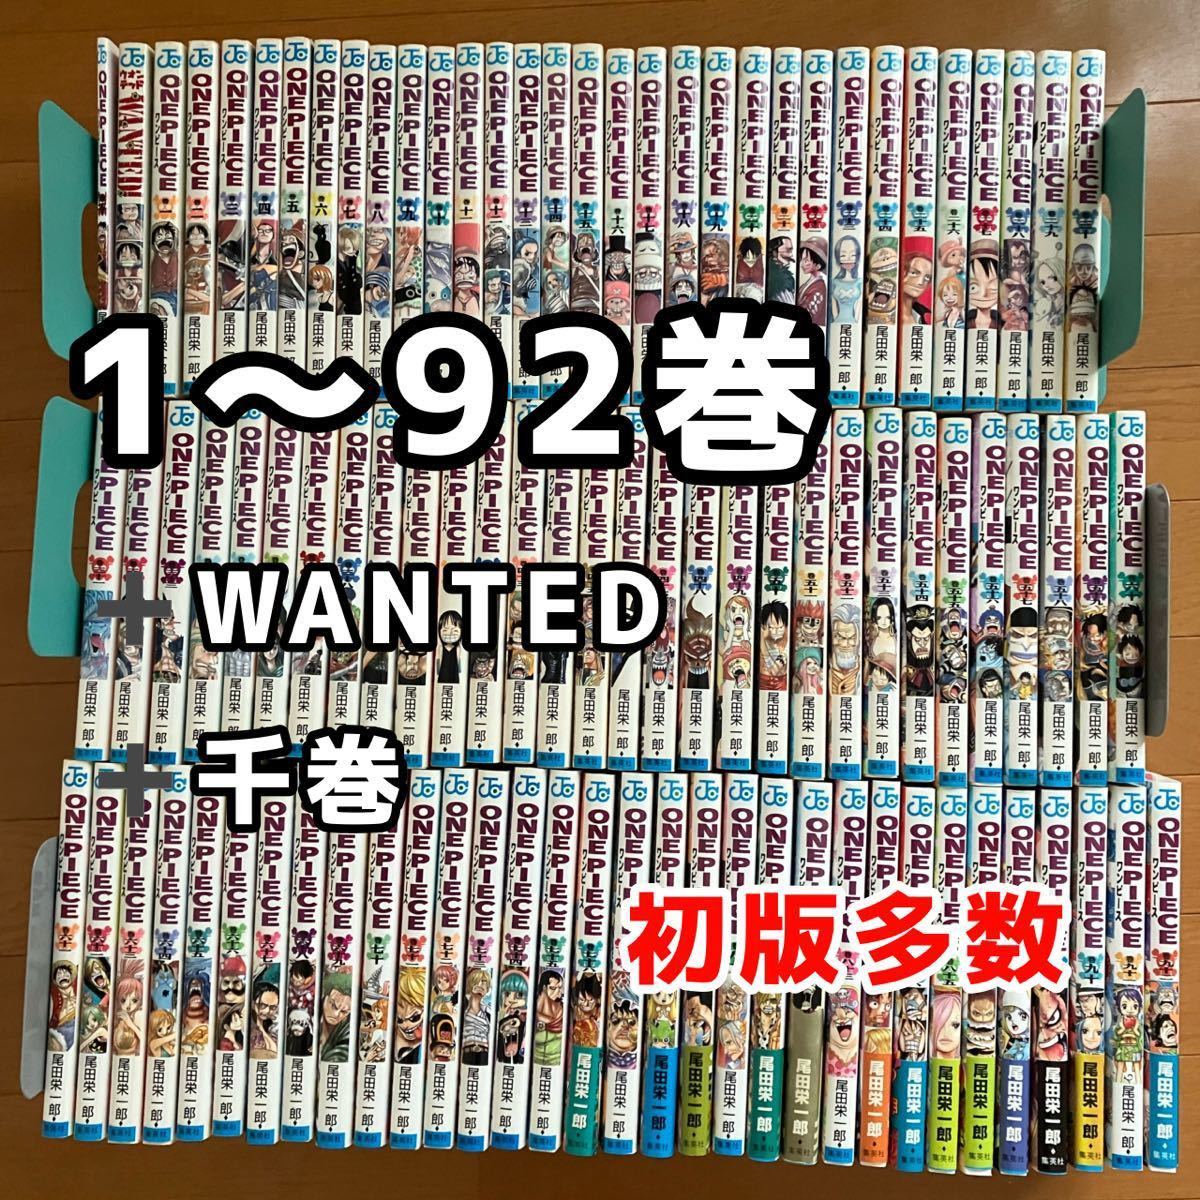 ONE PIECE ワンピース 尾田栄一郎 1～92巻 WANTED 千 94冊 コミック